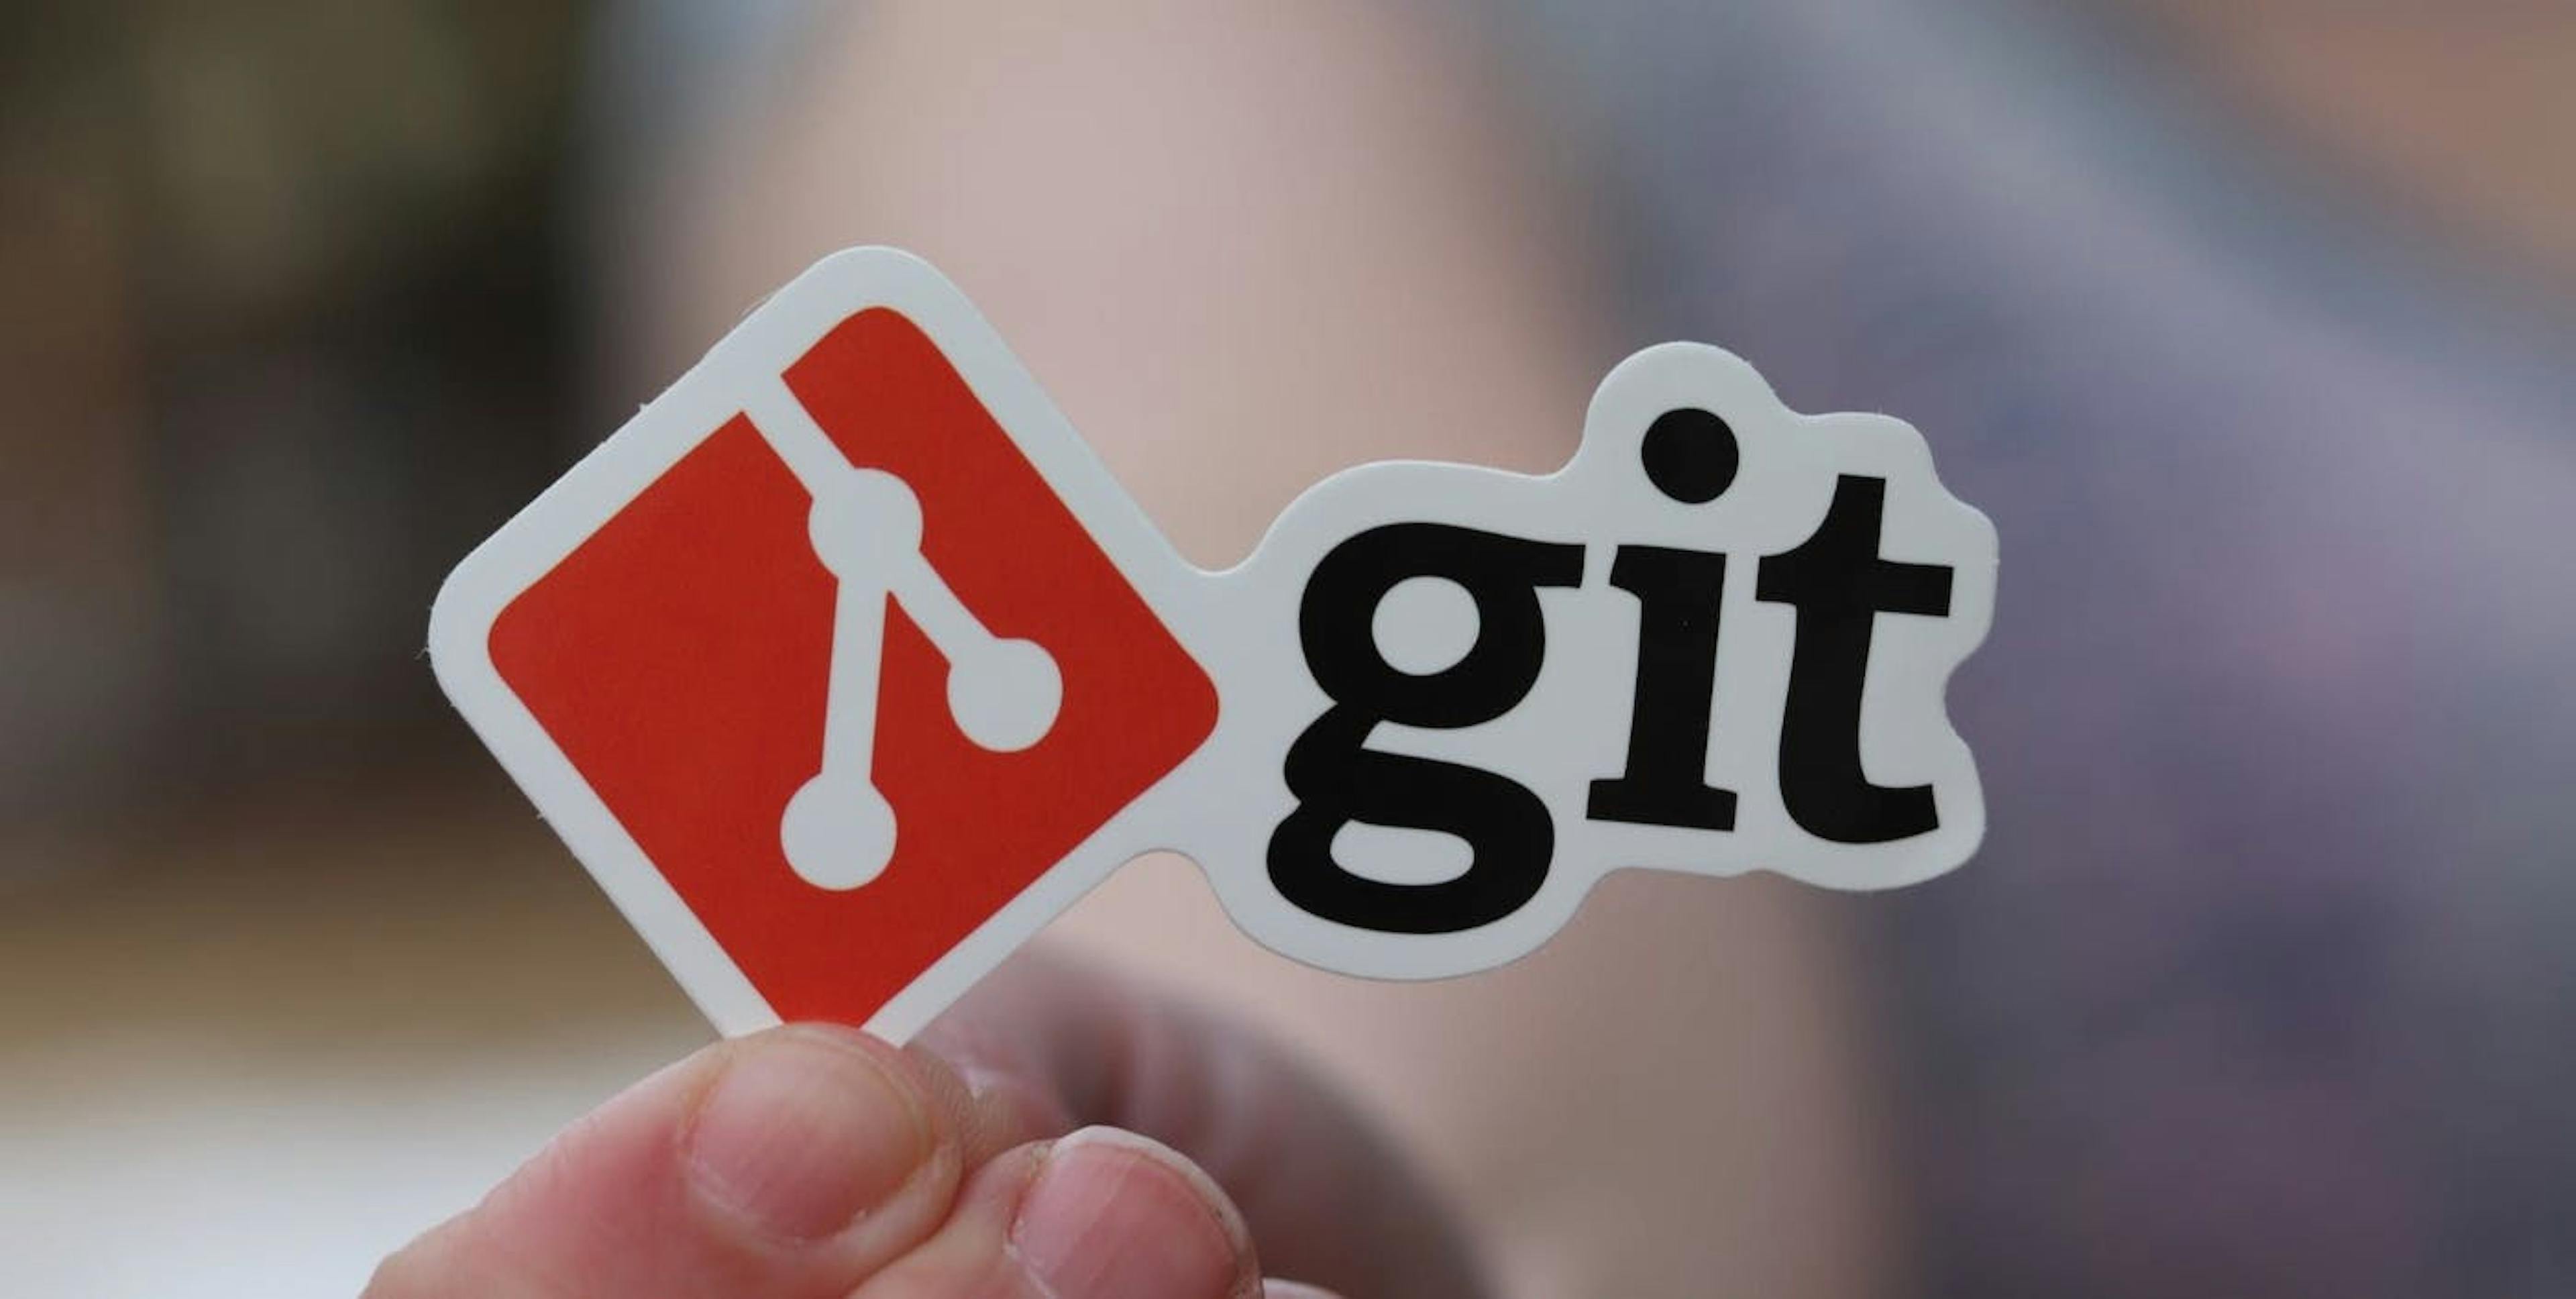 /git-guide-4-take-your-first-steps-with-git feature image